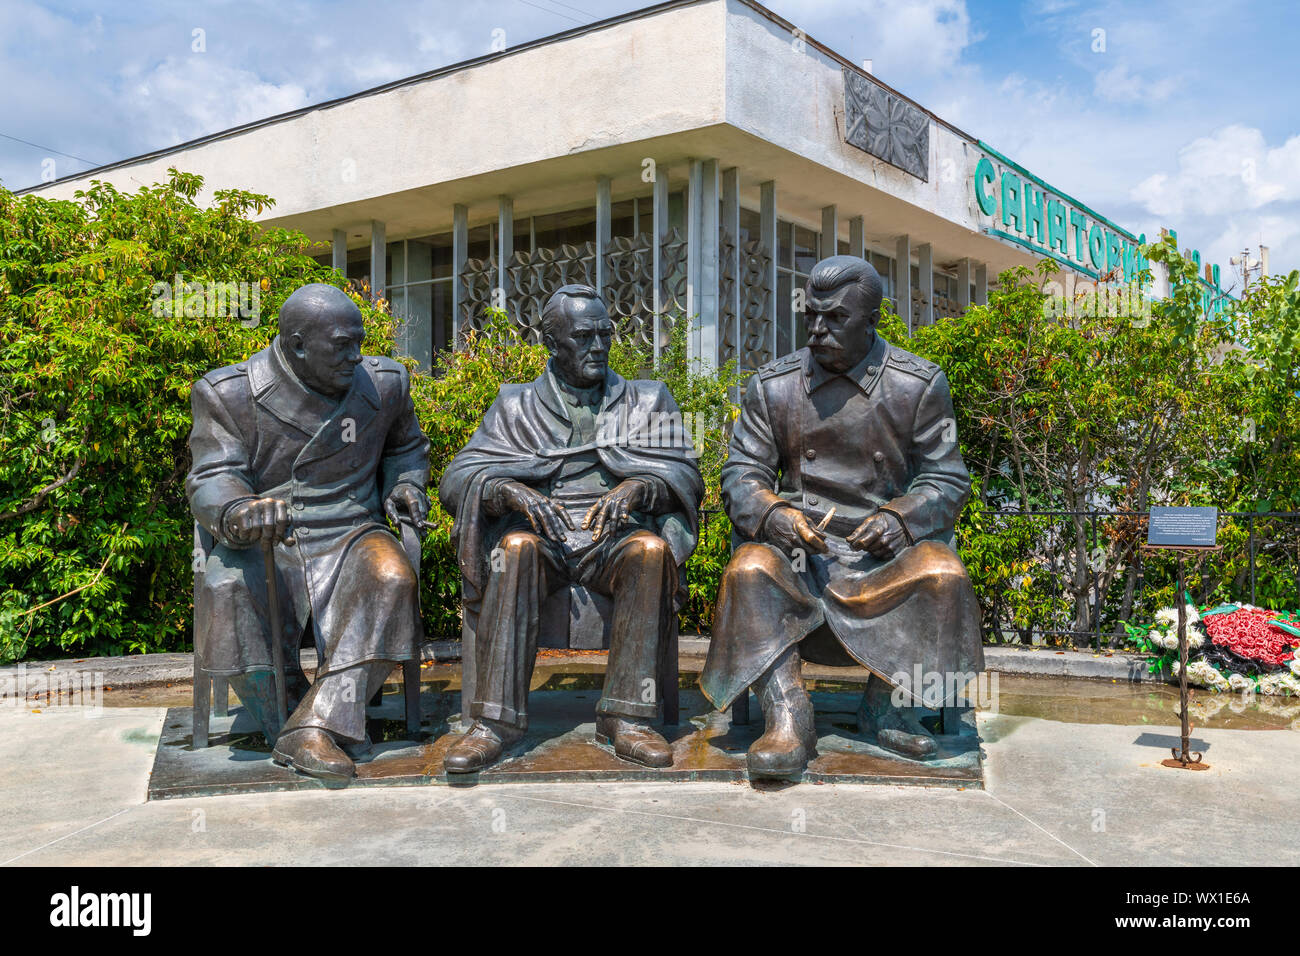 Livadia, Crimea - July 10. 2019. Monument to Stalin, Roosevelt and Churchill for anniversary of conference in Yalta in 1945 Stock Photo